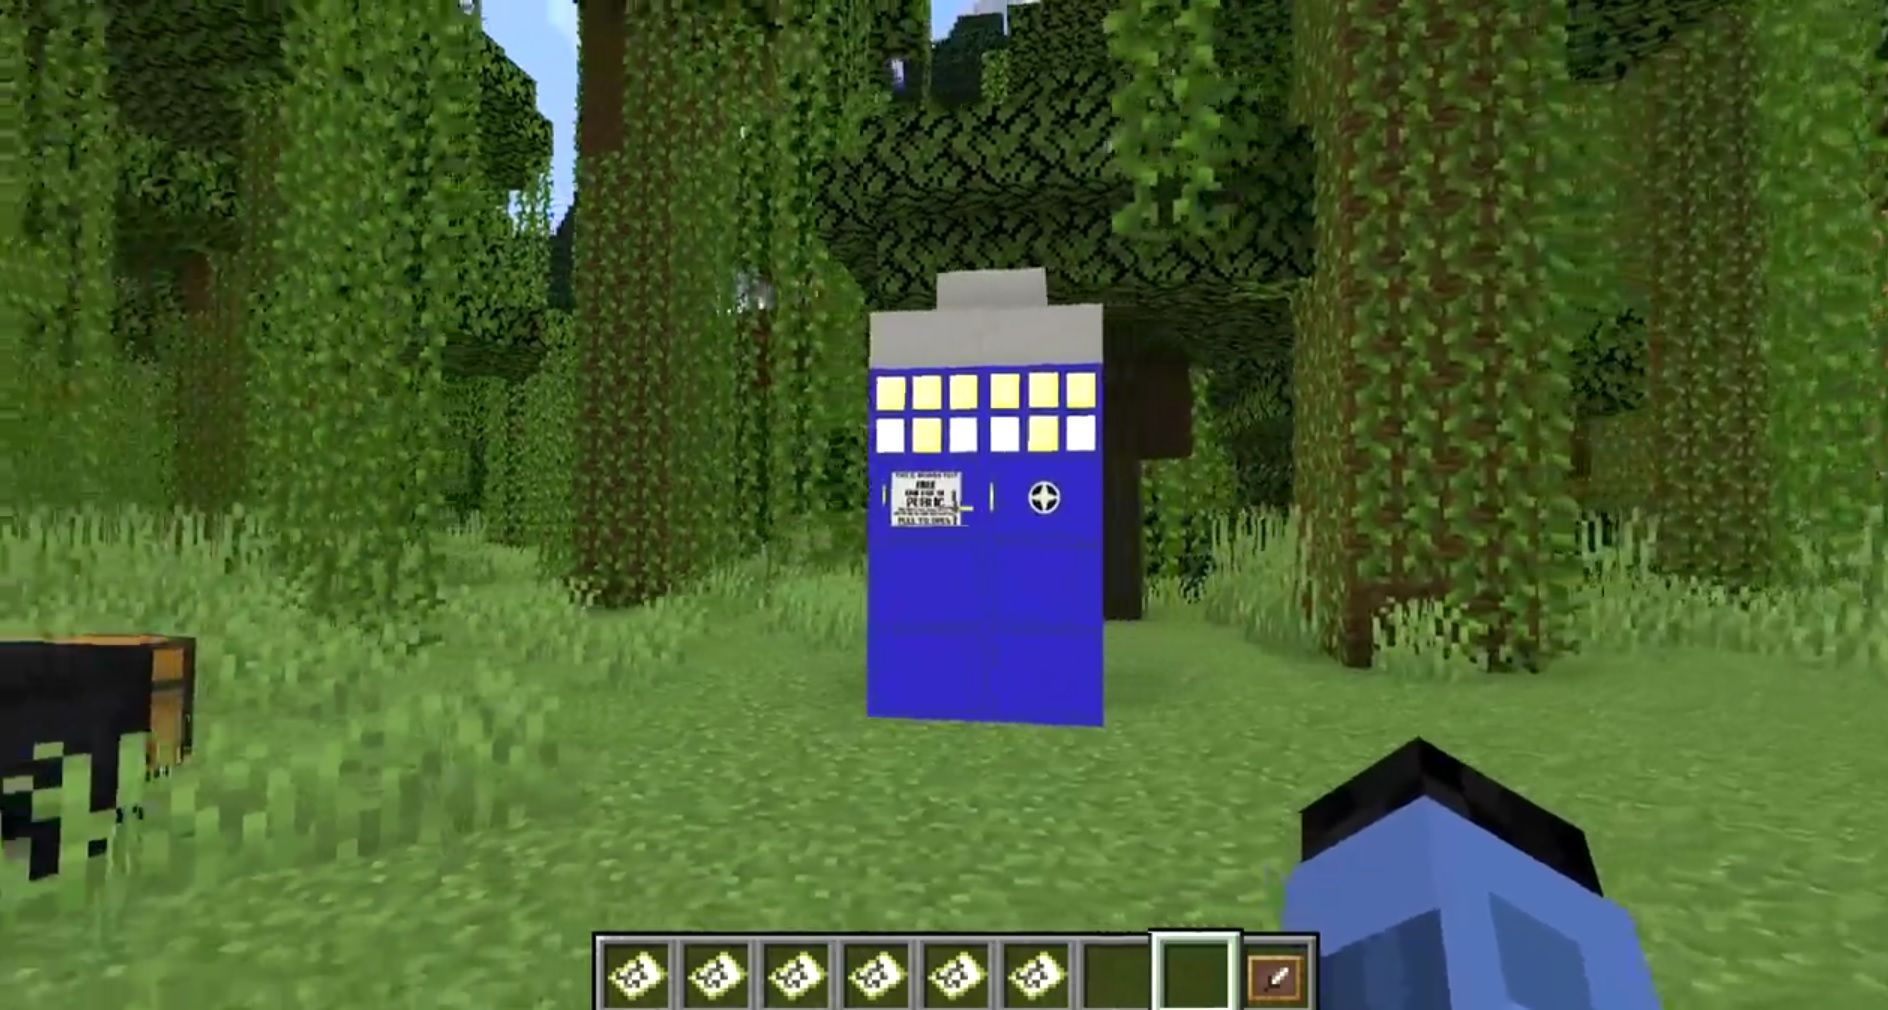 Screenshow showing a Doctor Who TARDIS in the Minecraft